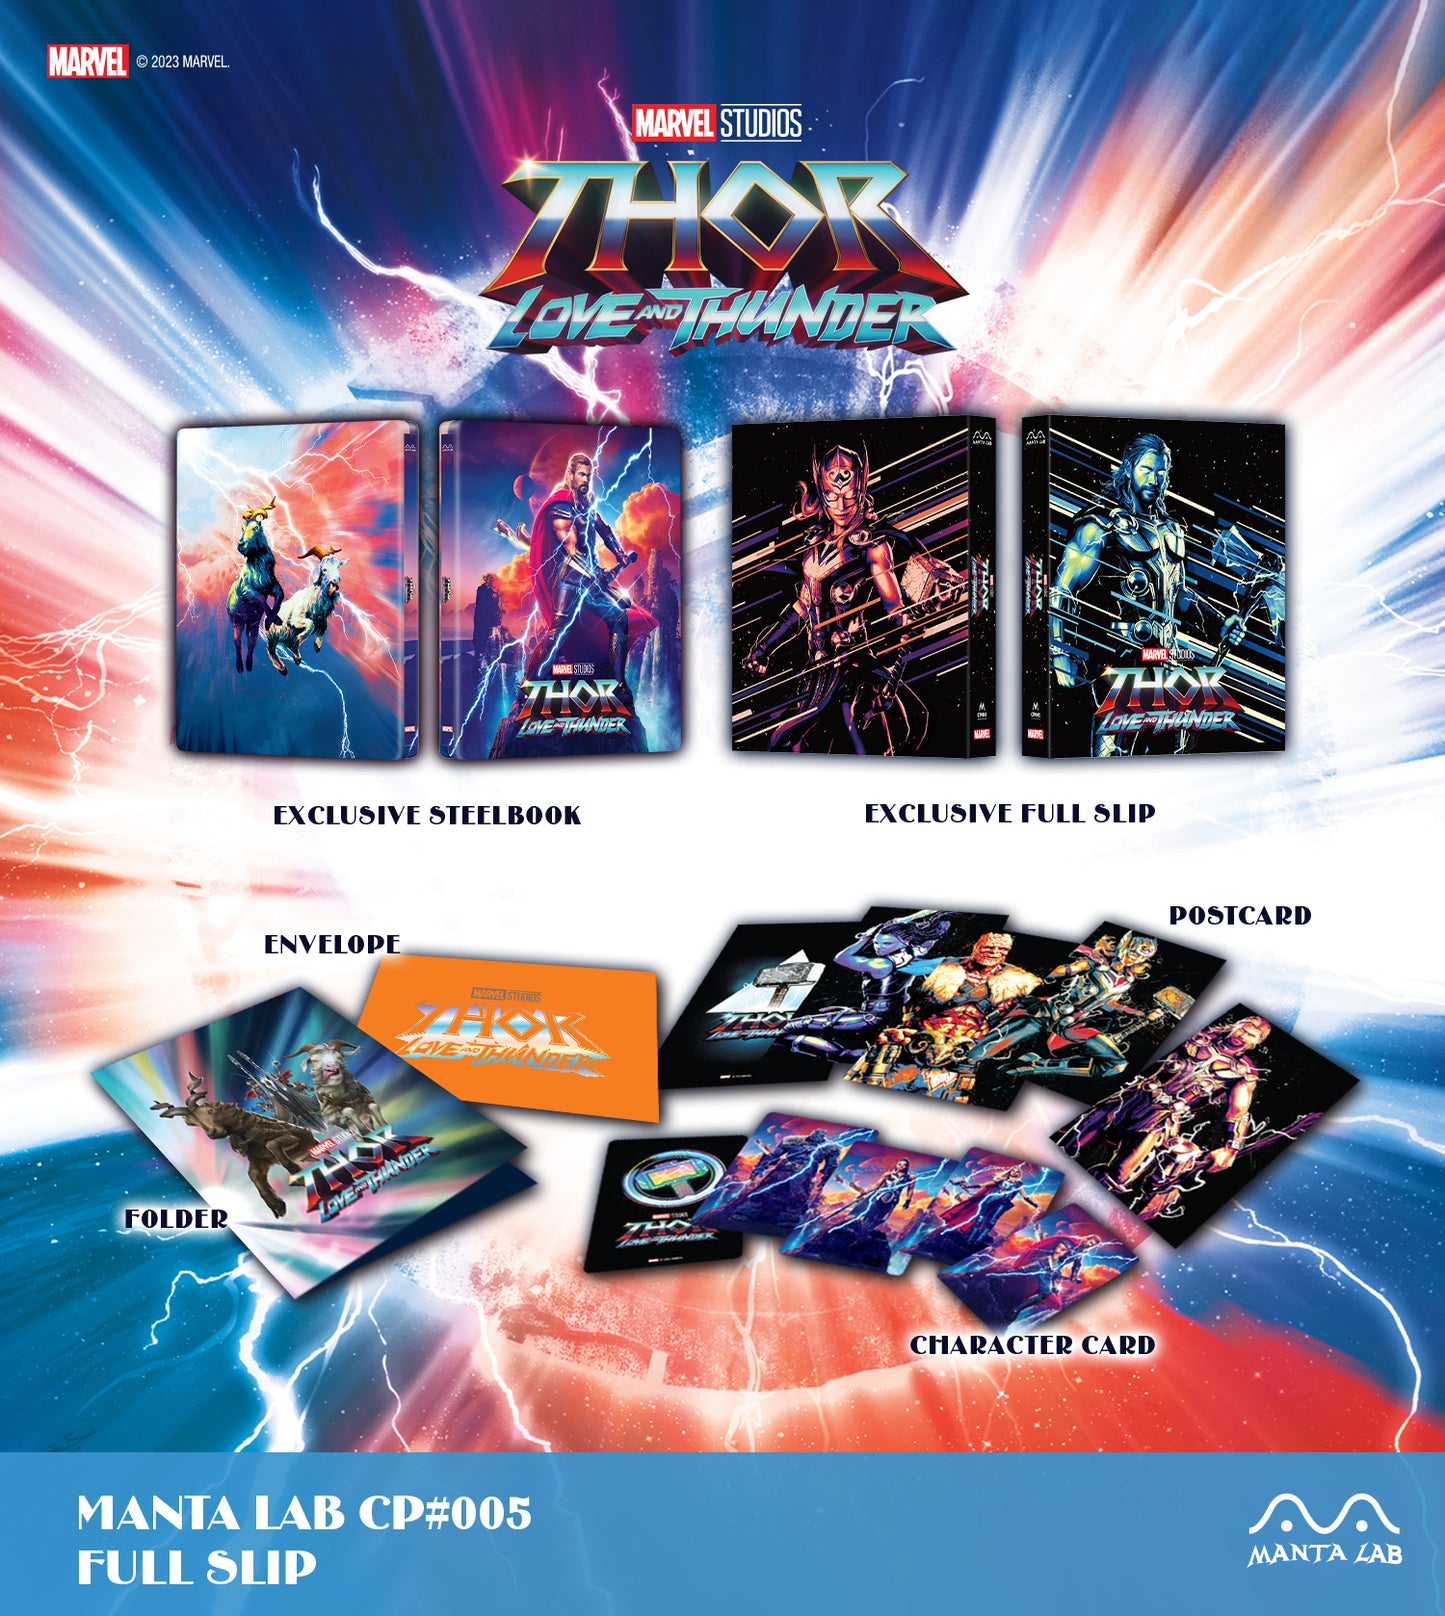 Thor: Love and Thunder Steelbook (Discless) Steelbook Manta Lab Exclusive MCP#-005 HDN GB Pre-Order One Click